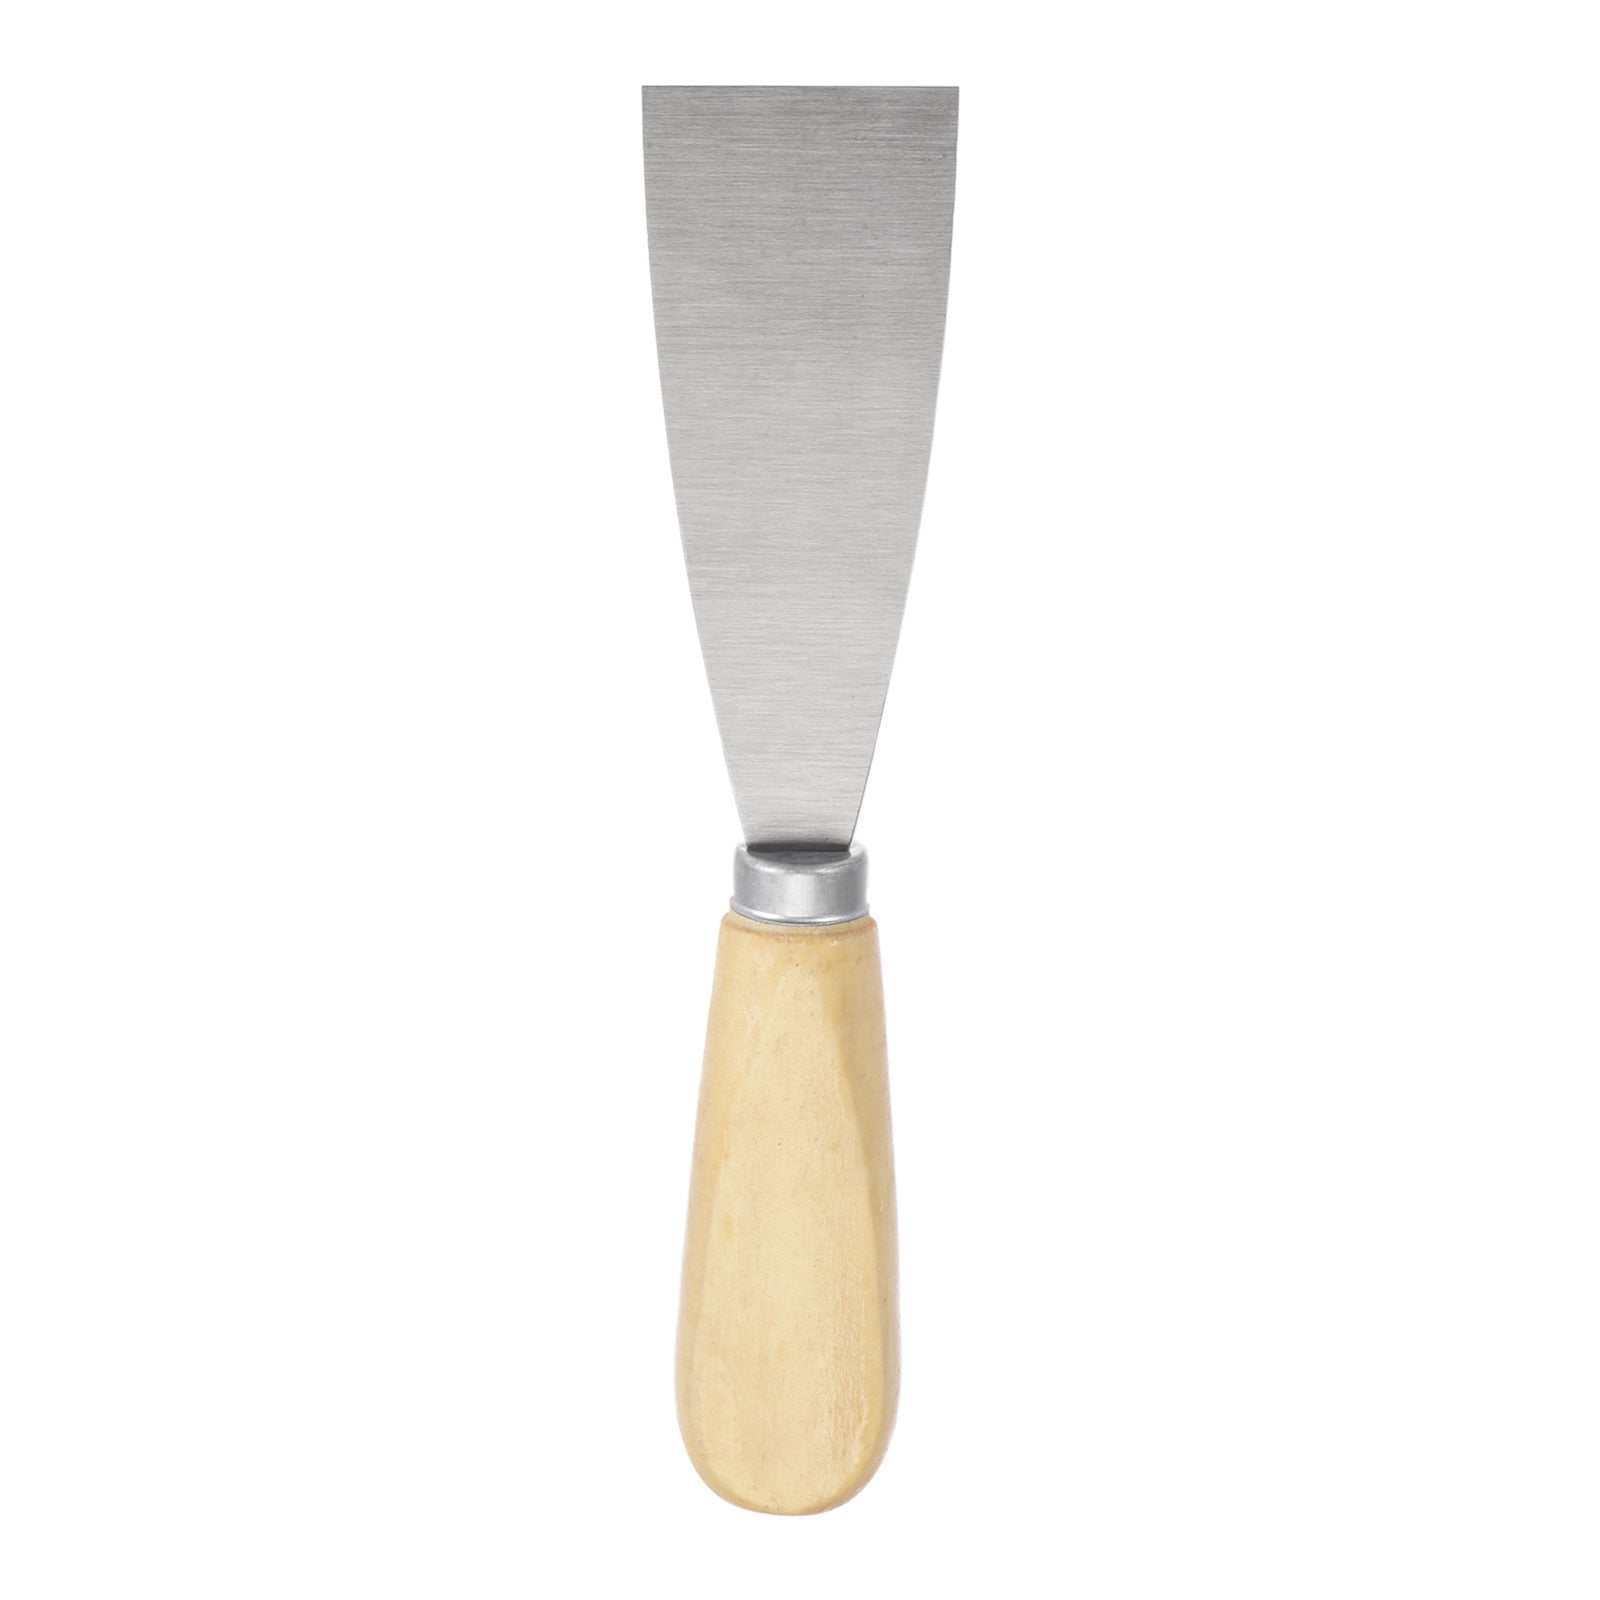 Durable spackle spatula For Perfectly Formed Pies 